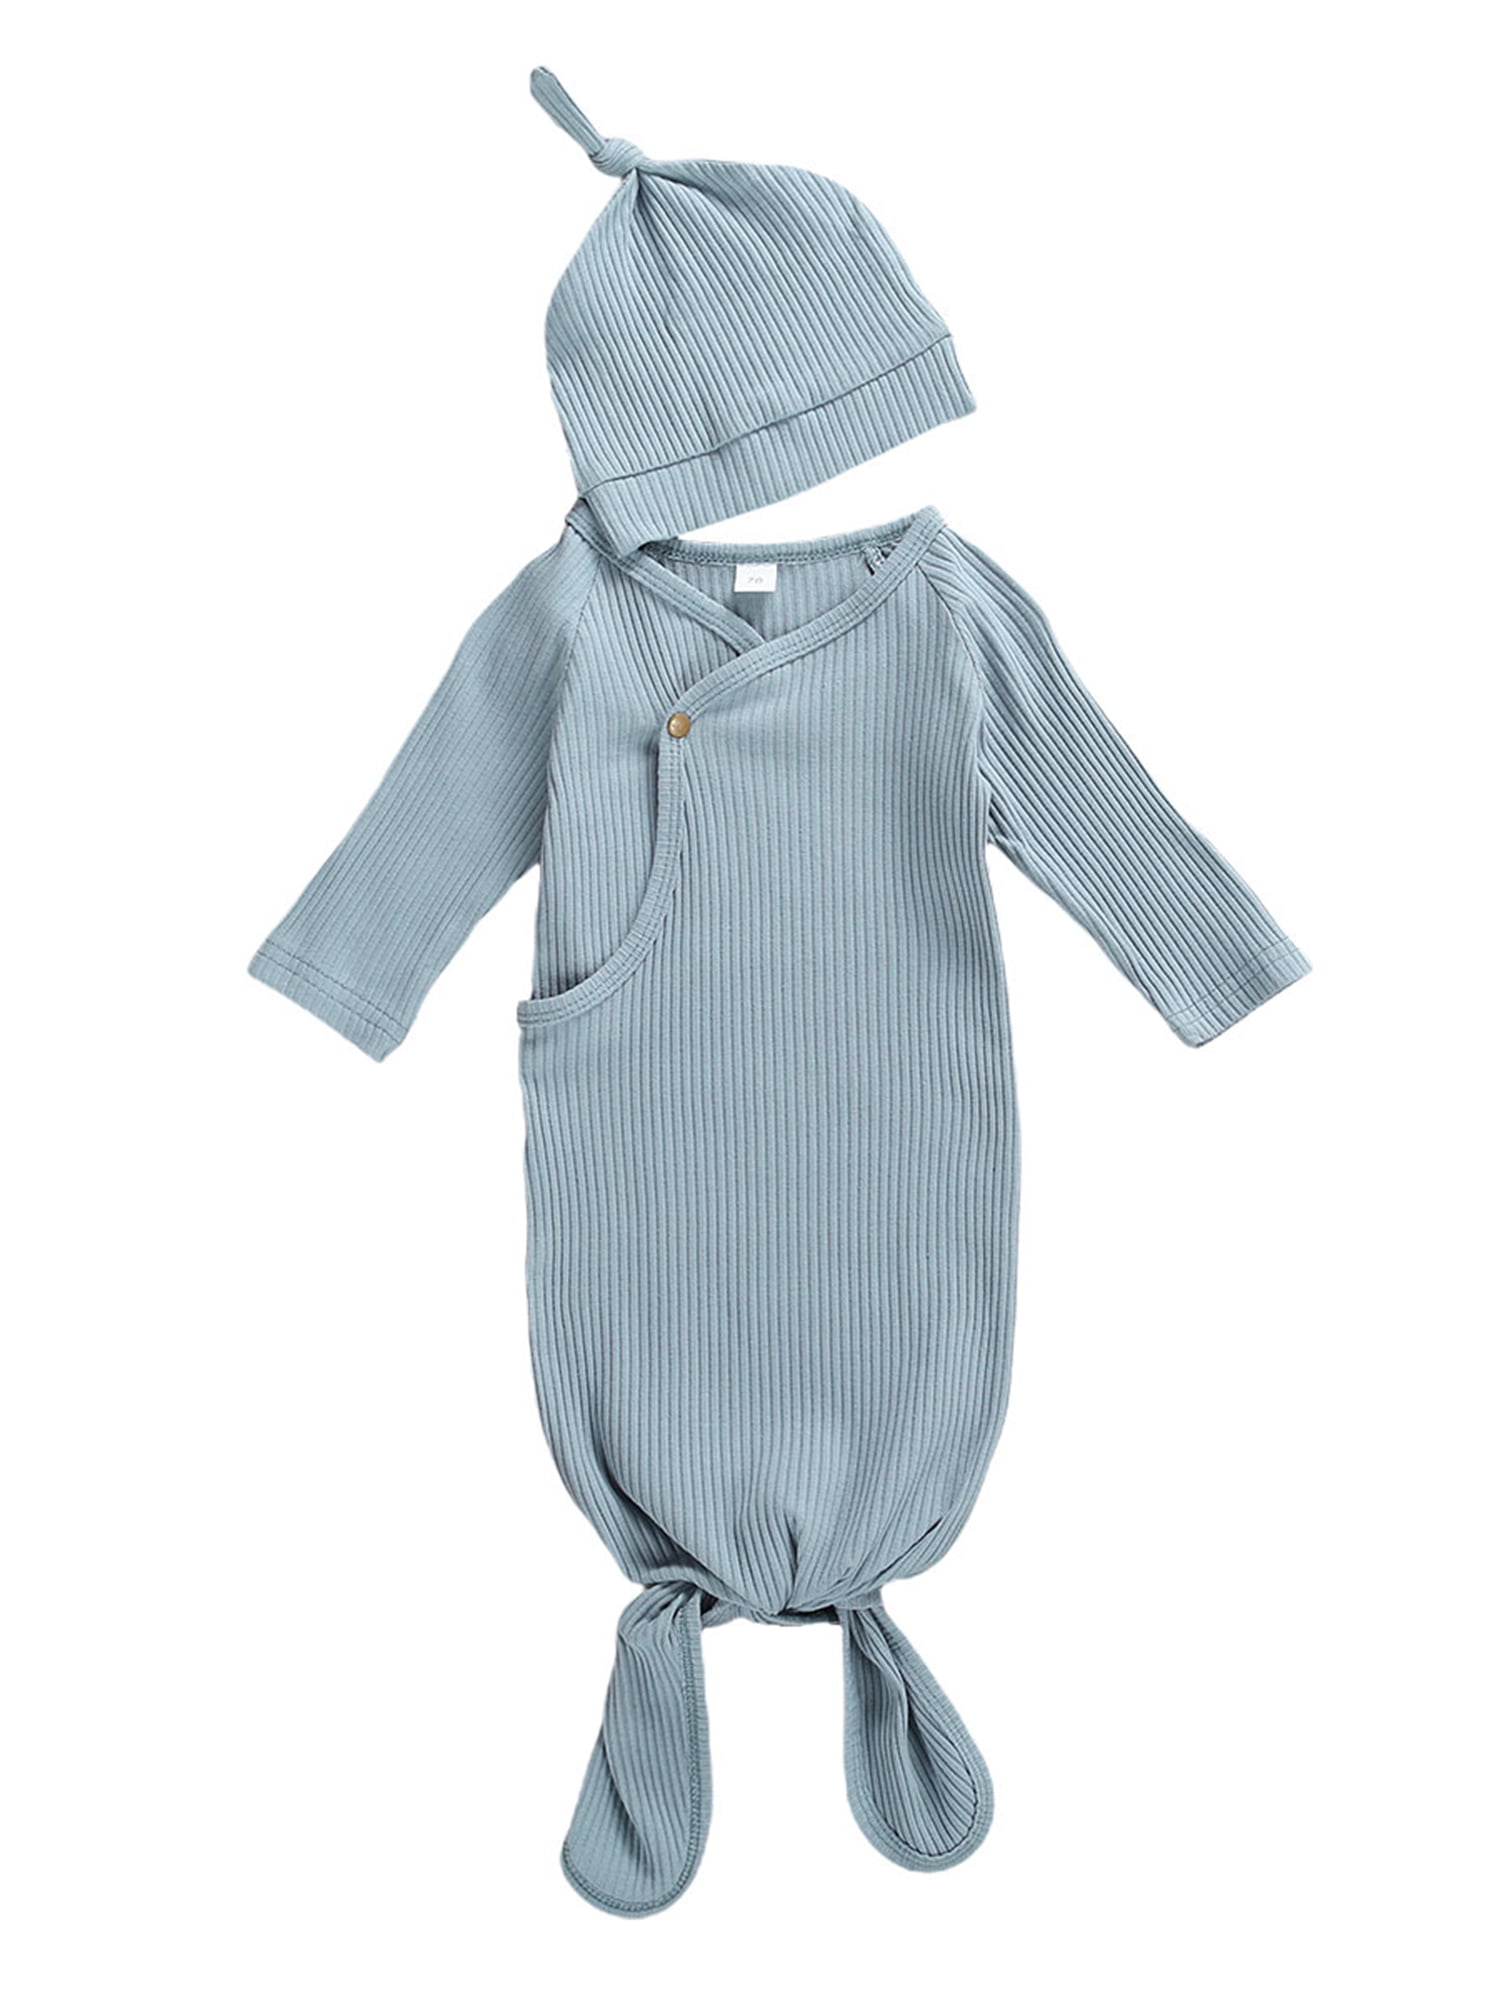 Petit Bateau Baby Footie with hat and wrap Blanket 3-Part in Gift Box